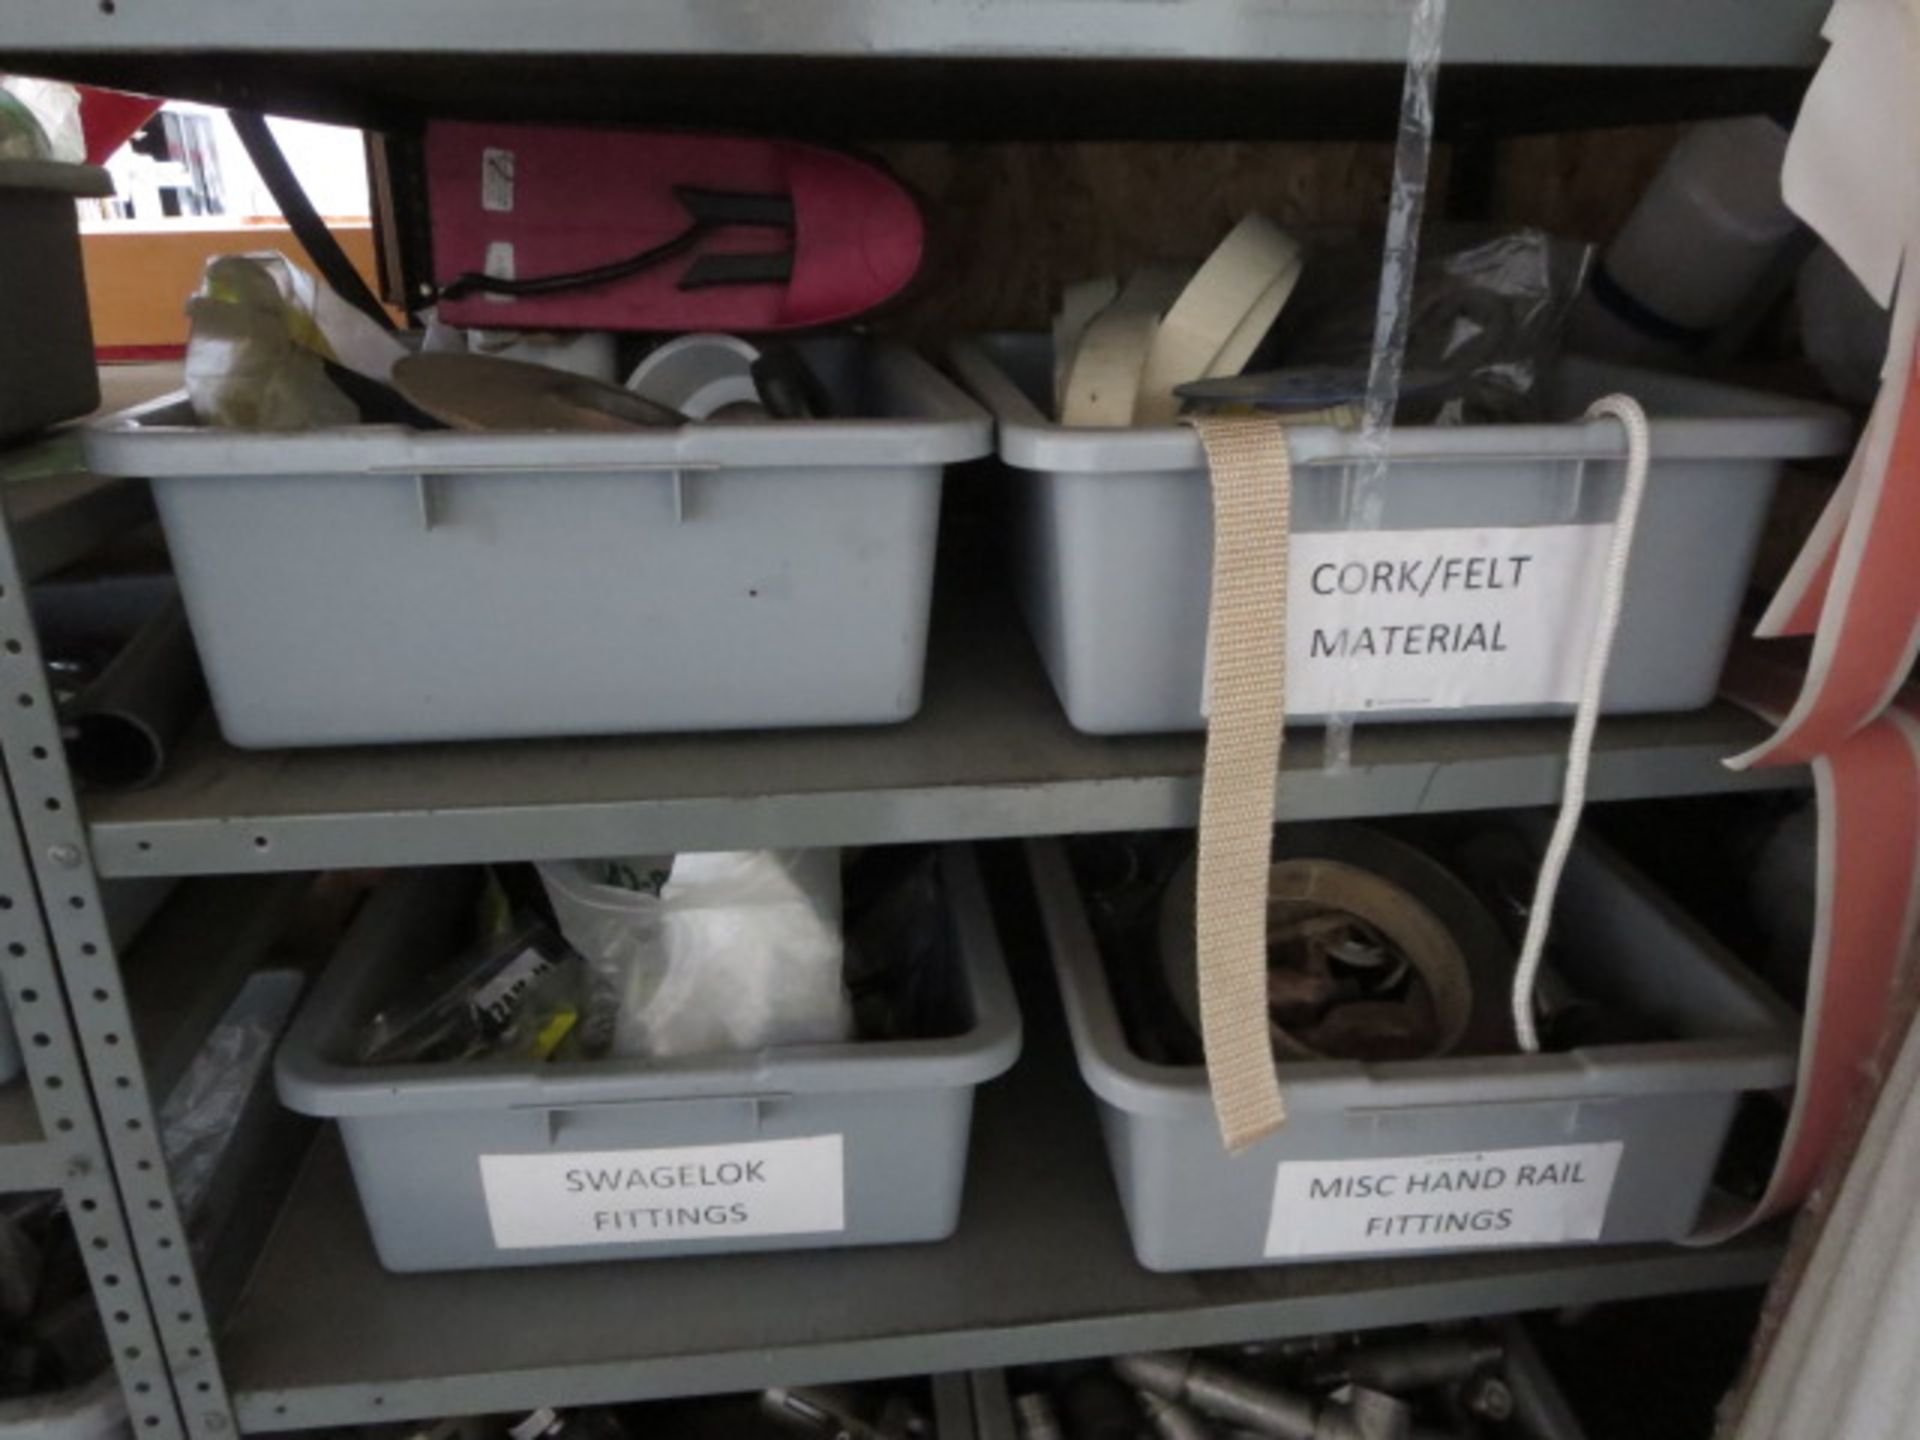 Lot of Assorted Fittings, Seals, Tubing, and Miscellaneous Rubber, Contents of Shelves - Image 3 of 4